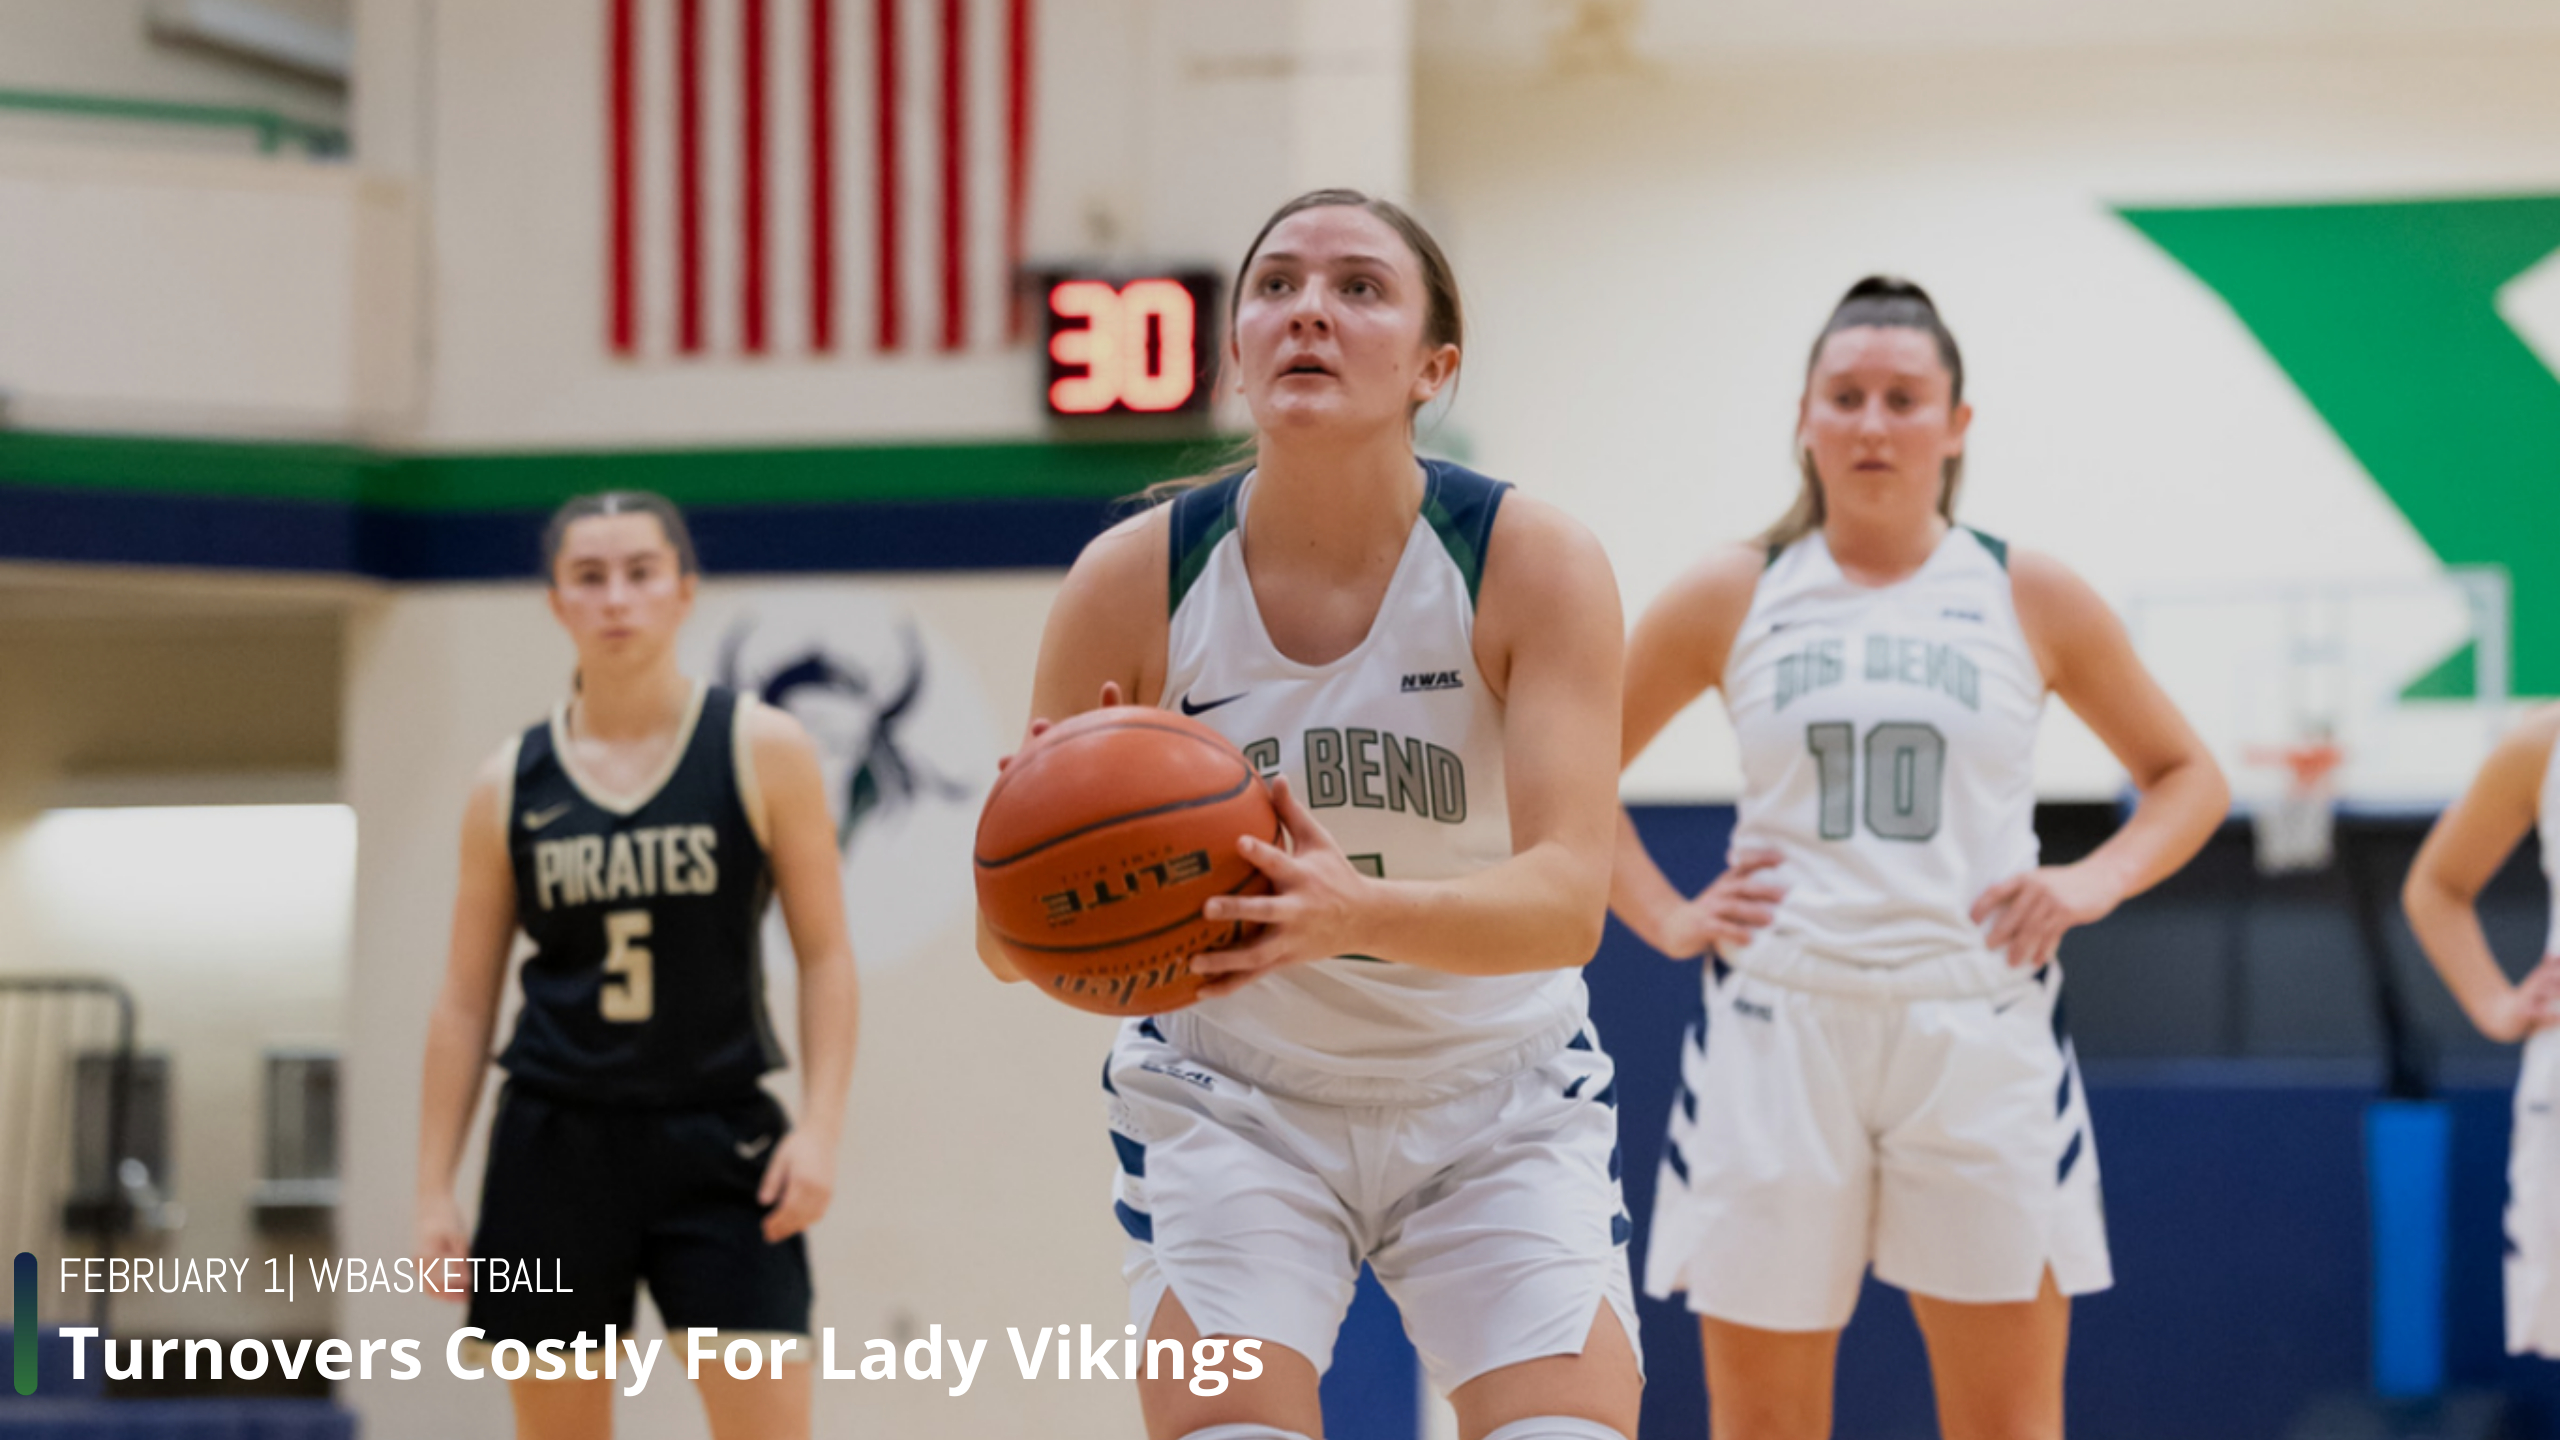 Turnovers Costly For Lady Vikings